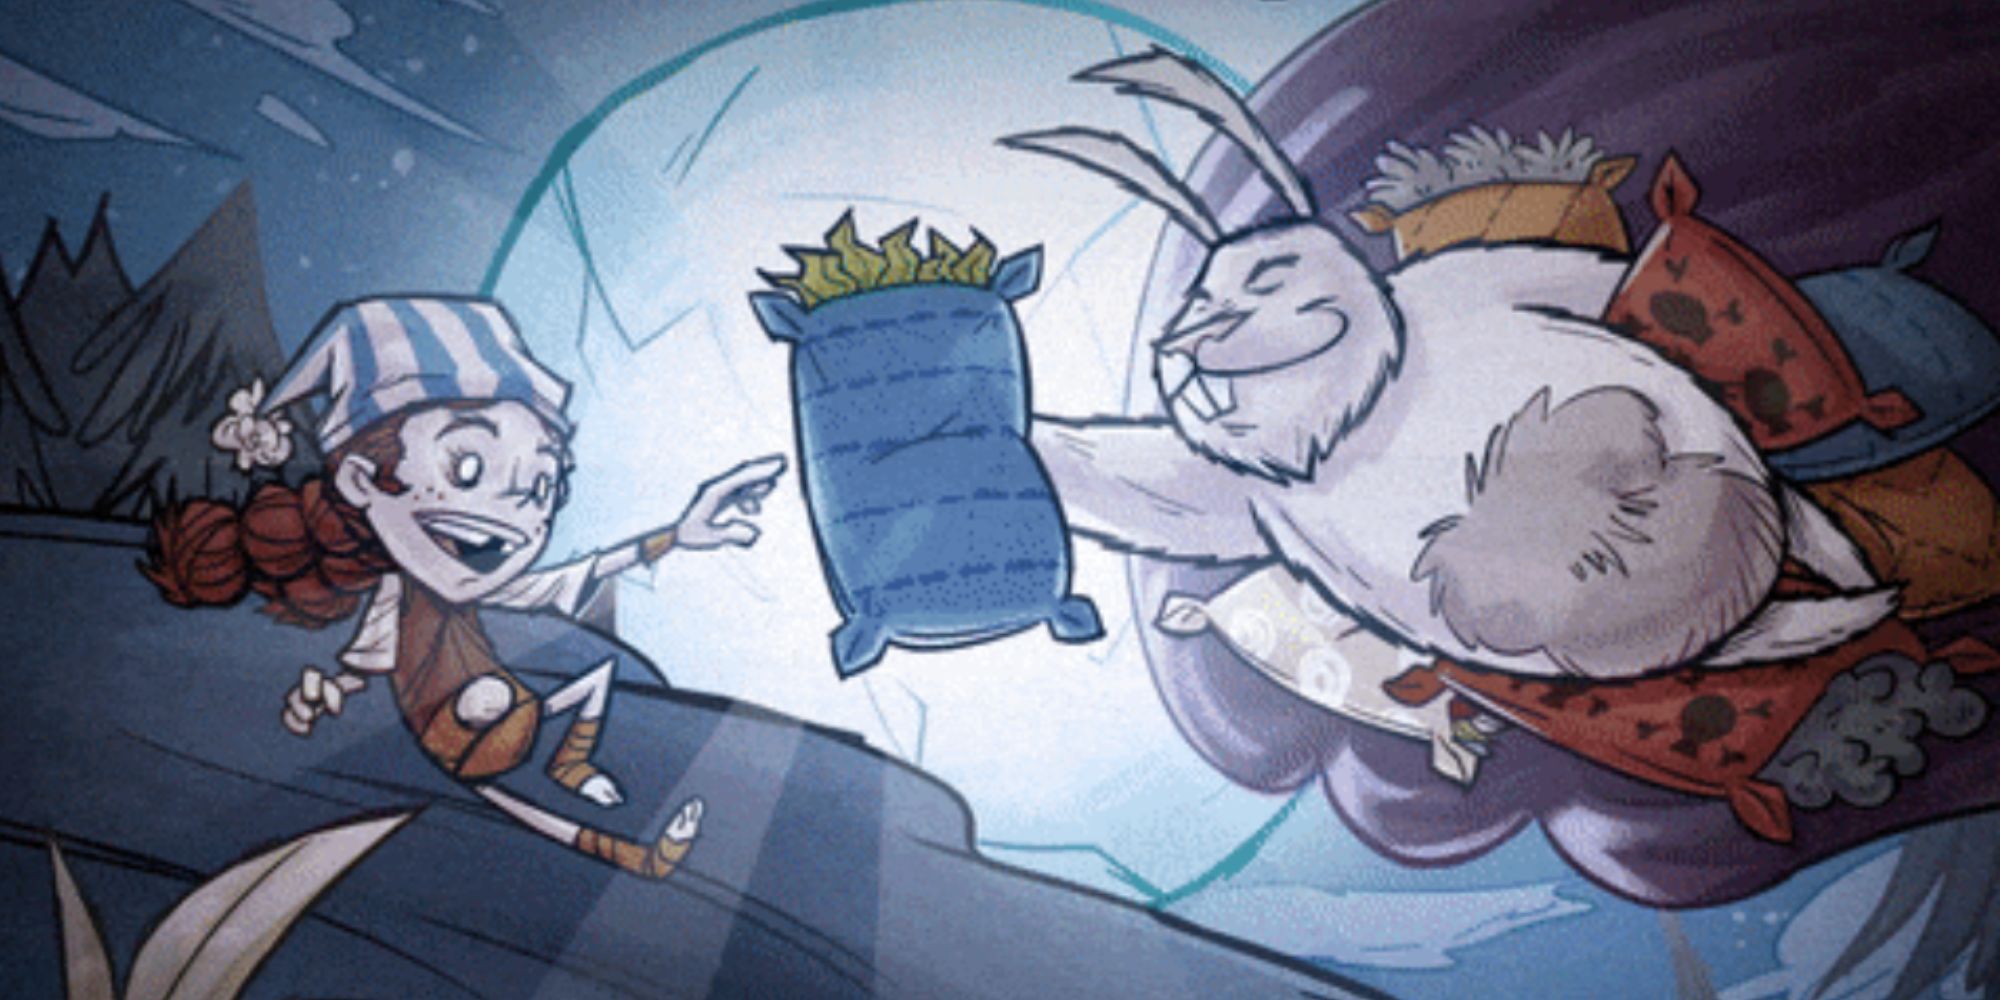 Image shows Wigfrid and a Bunnyman from Don't Starve Together.